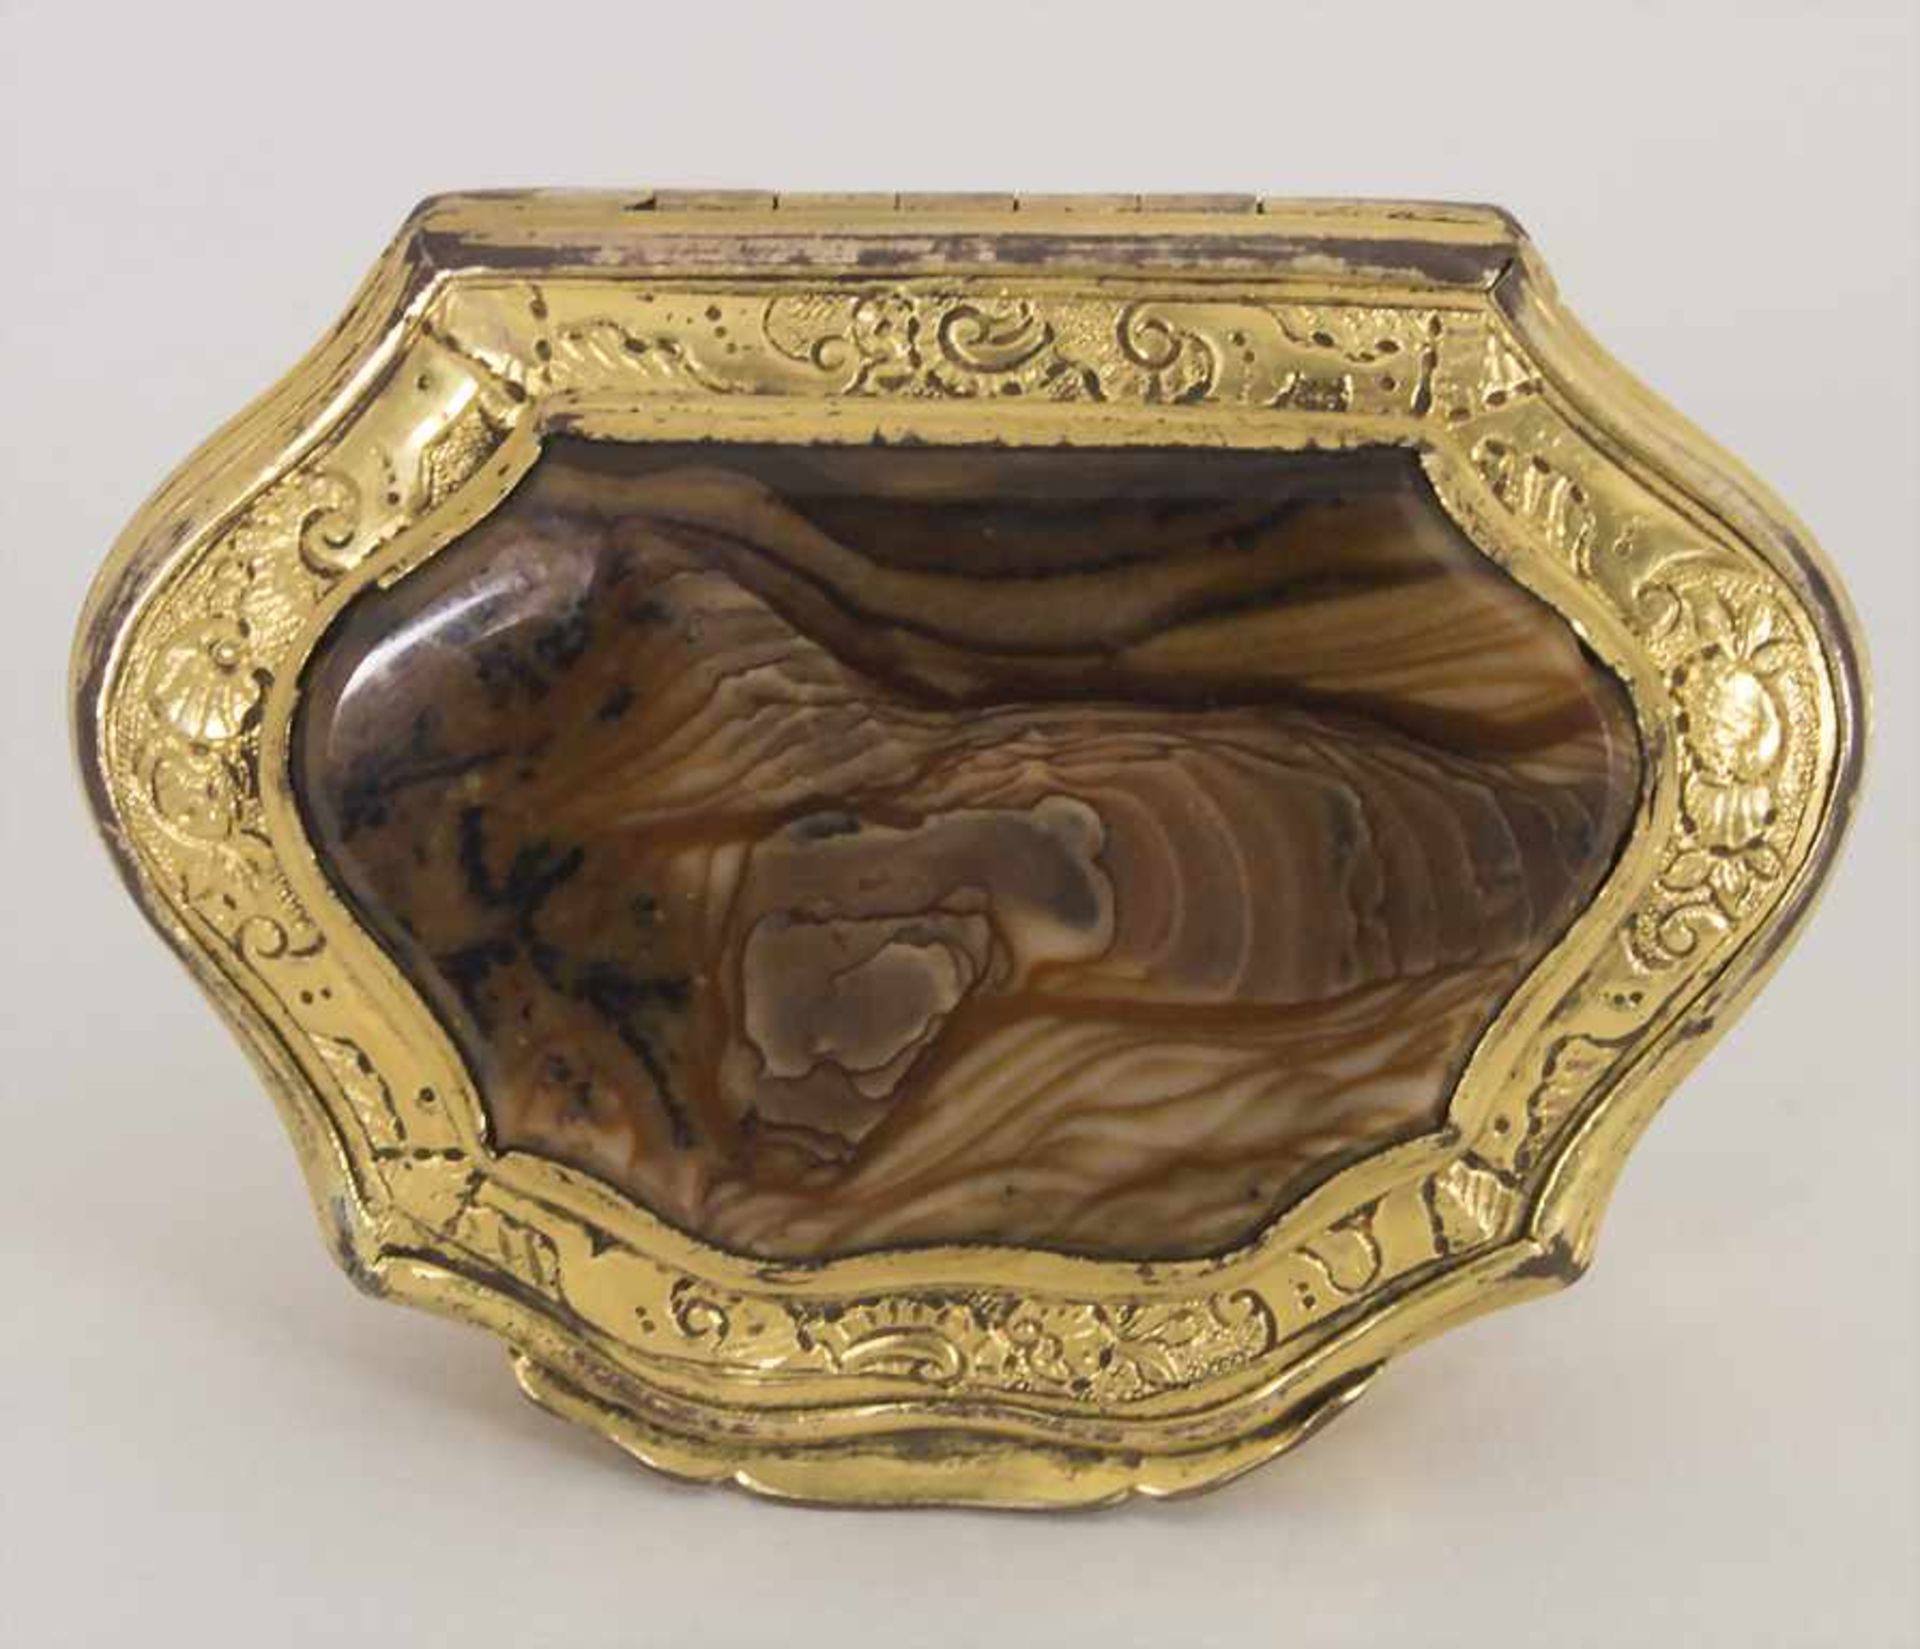 Schnupftabak-Dose / Tabatiere / A silver snuffbox, wohl Augsburg, um 1700Material: Silber, 13 Lot, - Image 3 of 7